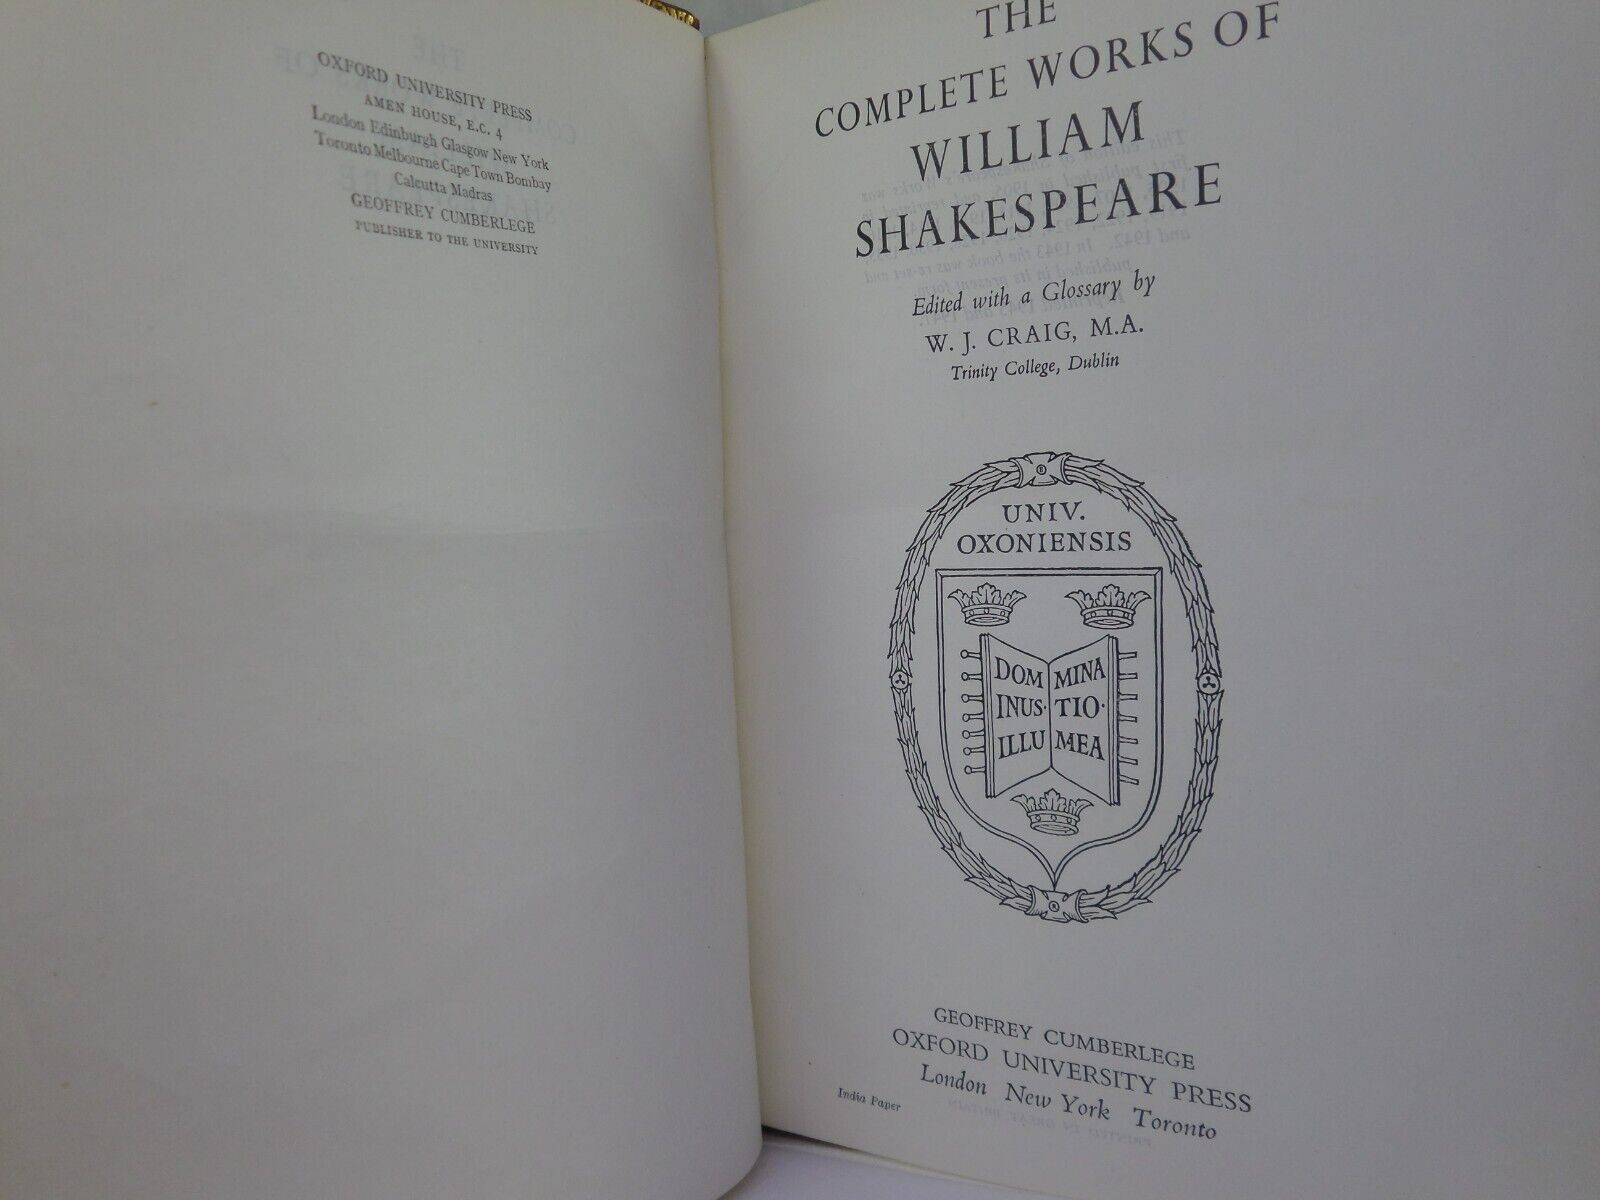 THE COMPLETE WORKS OF WILLIAM SHAKESPEARE 1947 FINE BINDING BY BAYNTUN-RIVIERE